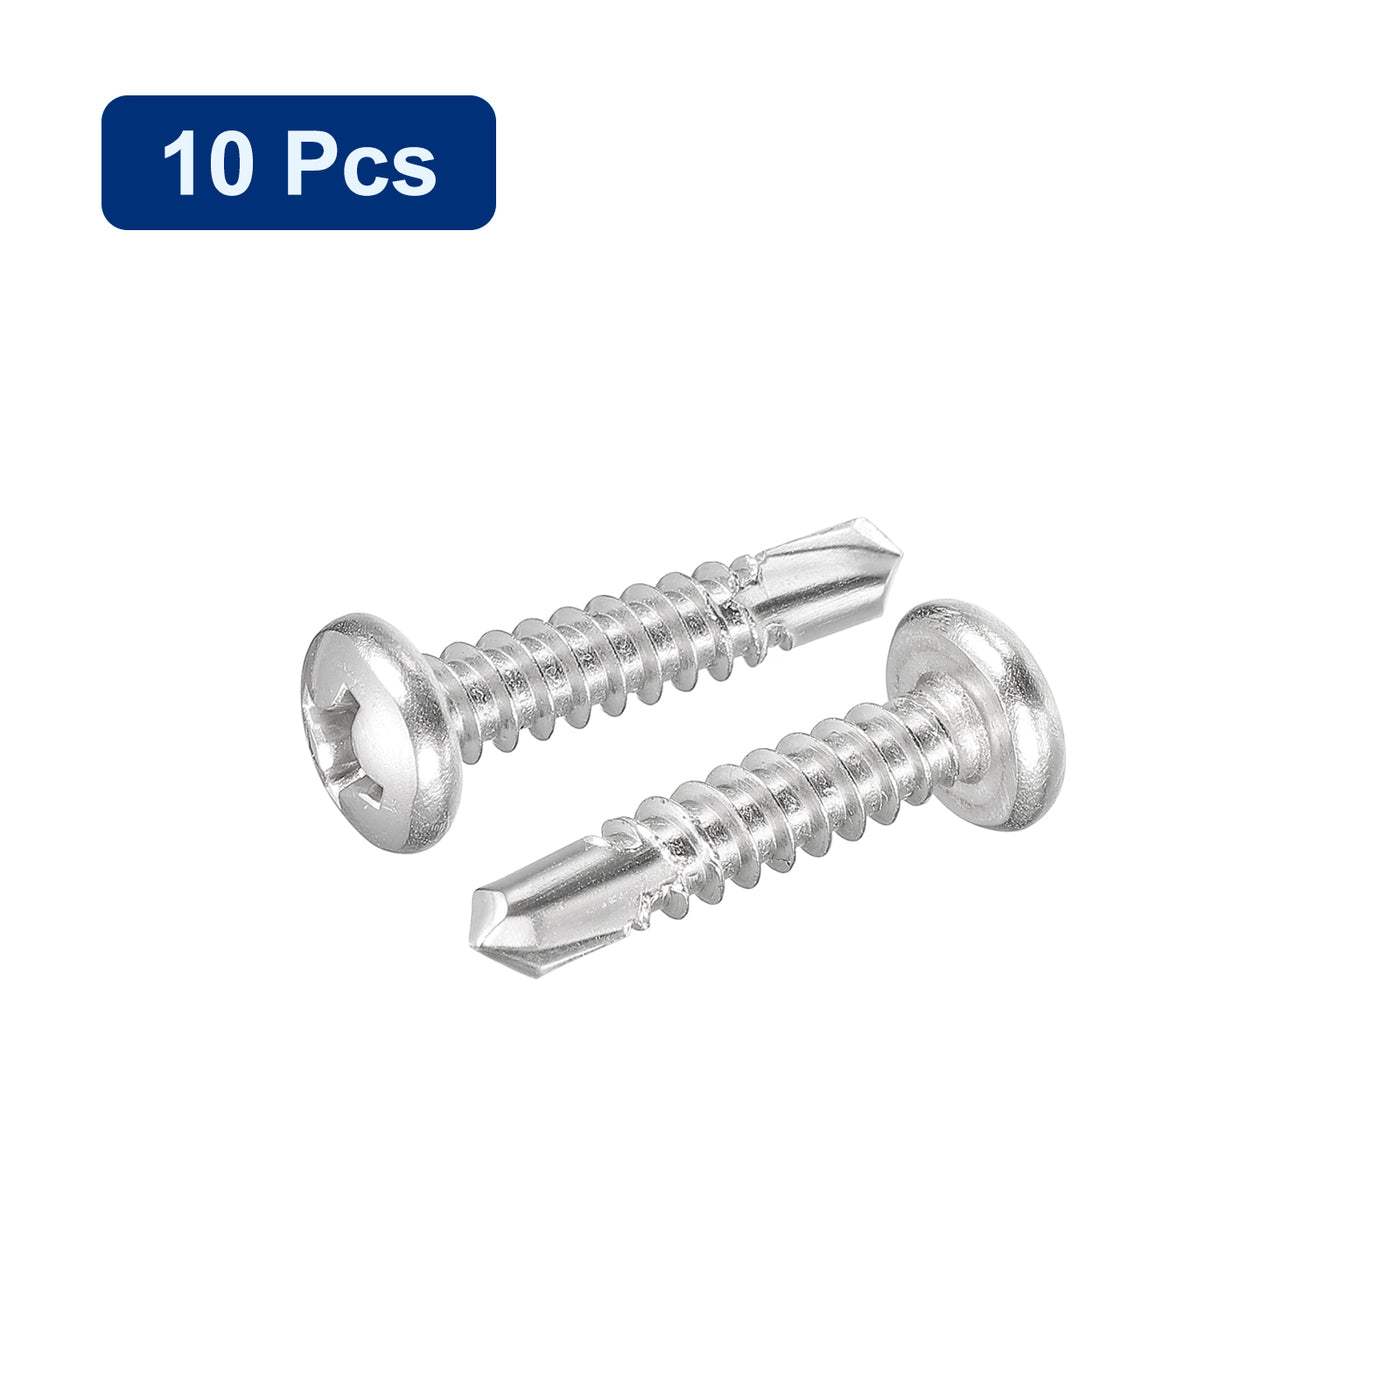 uxcell Uxcell #12 x 1" Self Drilling Screws, 10pcs Phillips Pan Head Self Tapping Screws